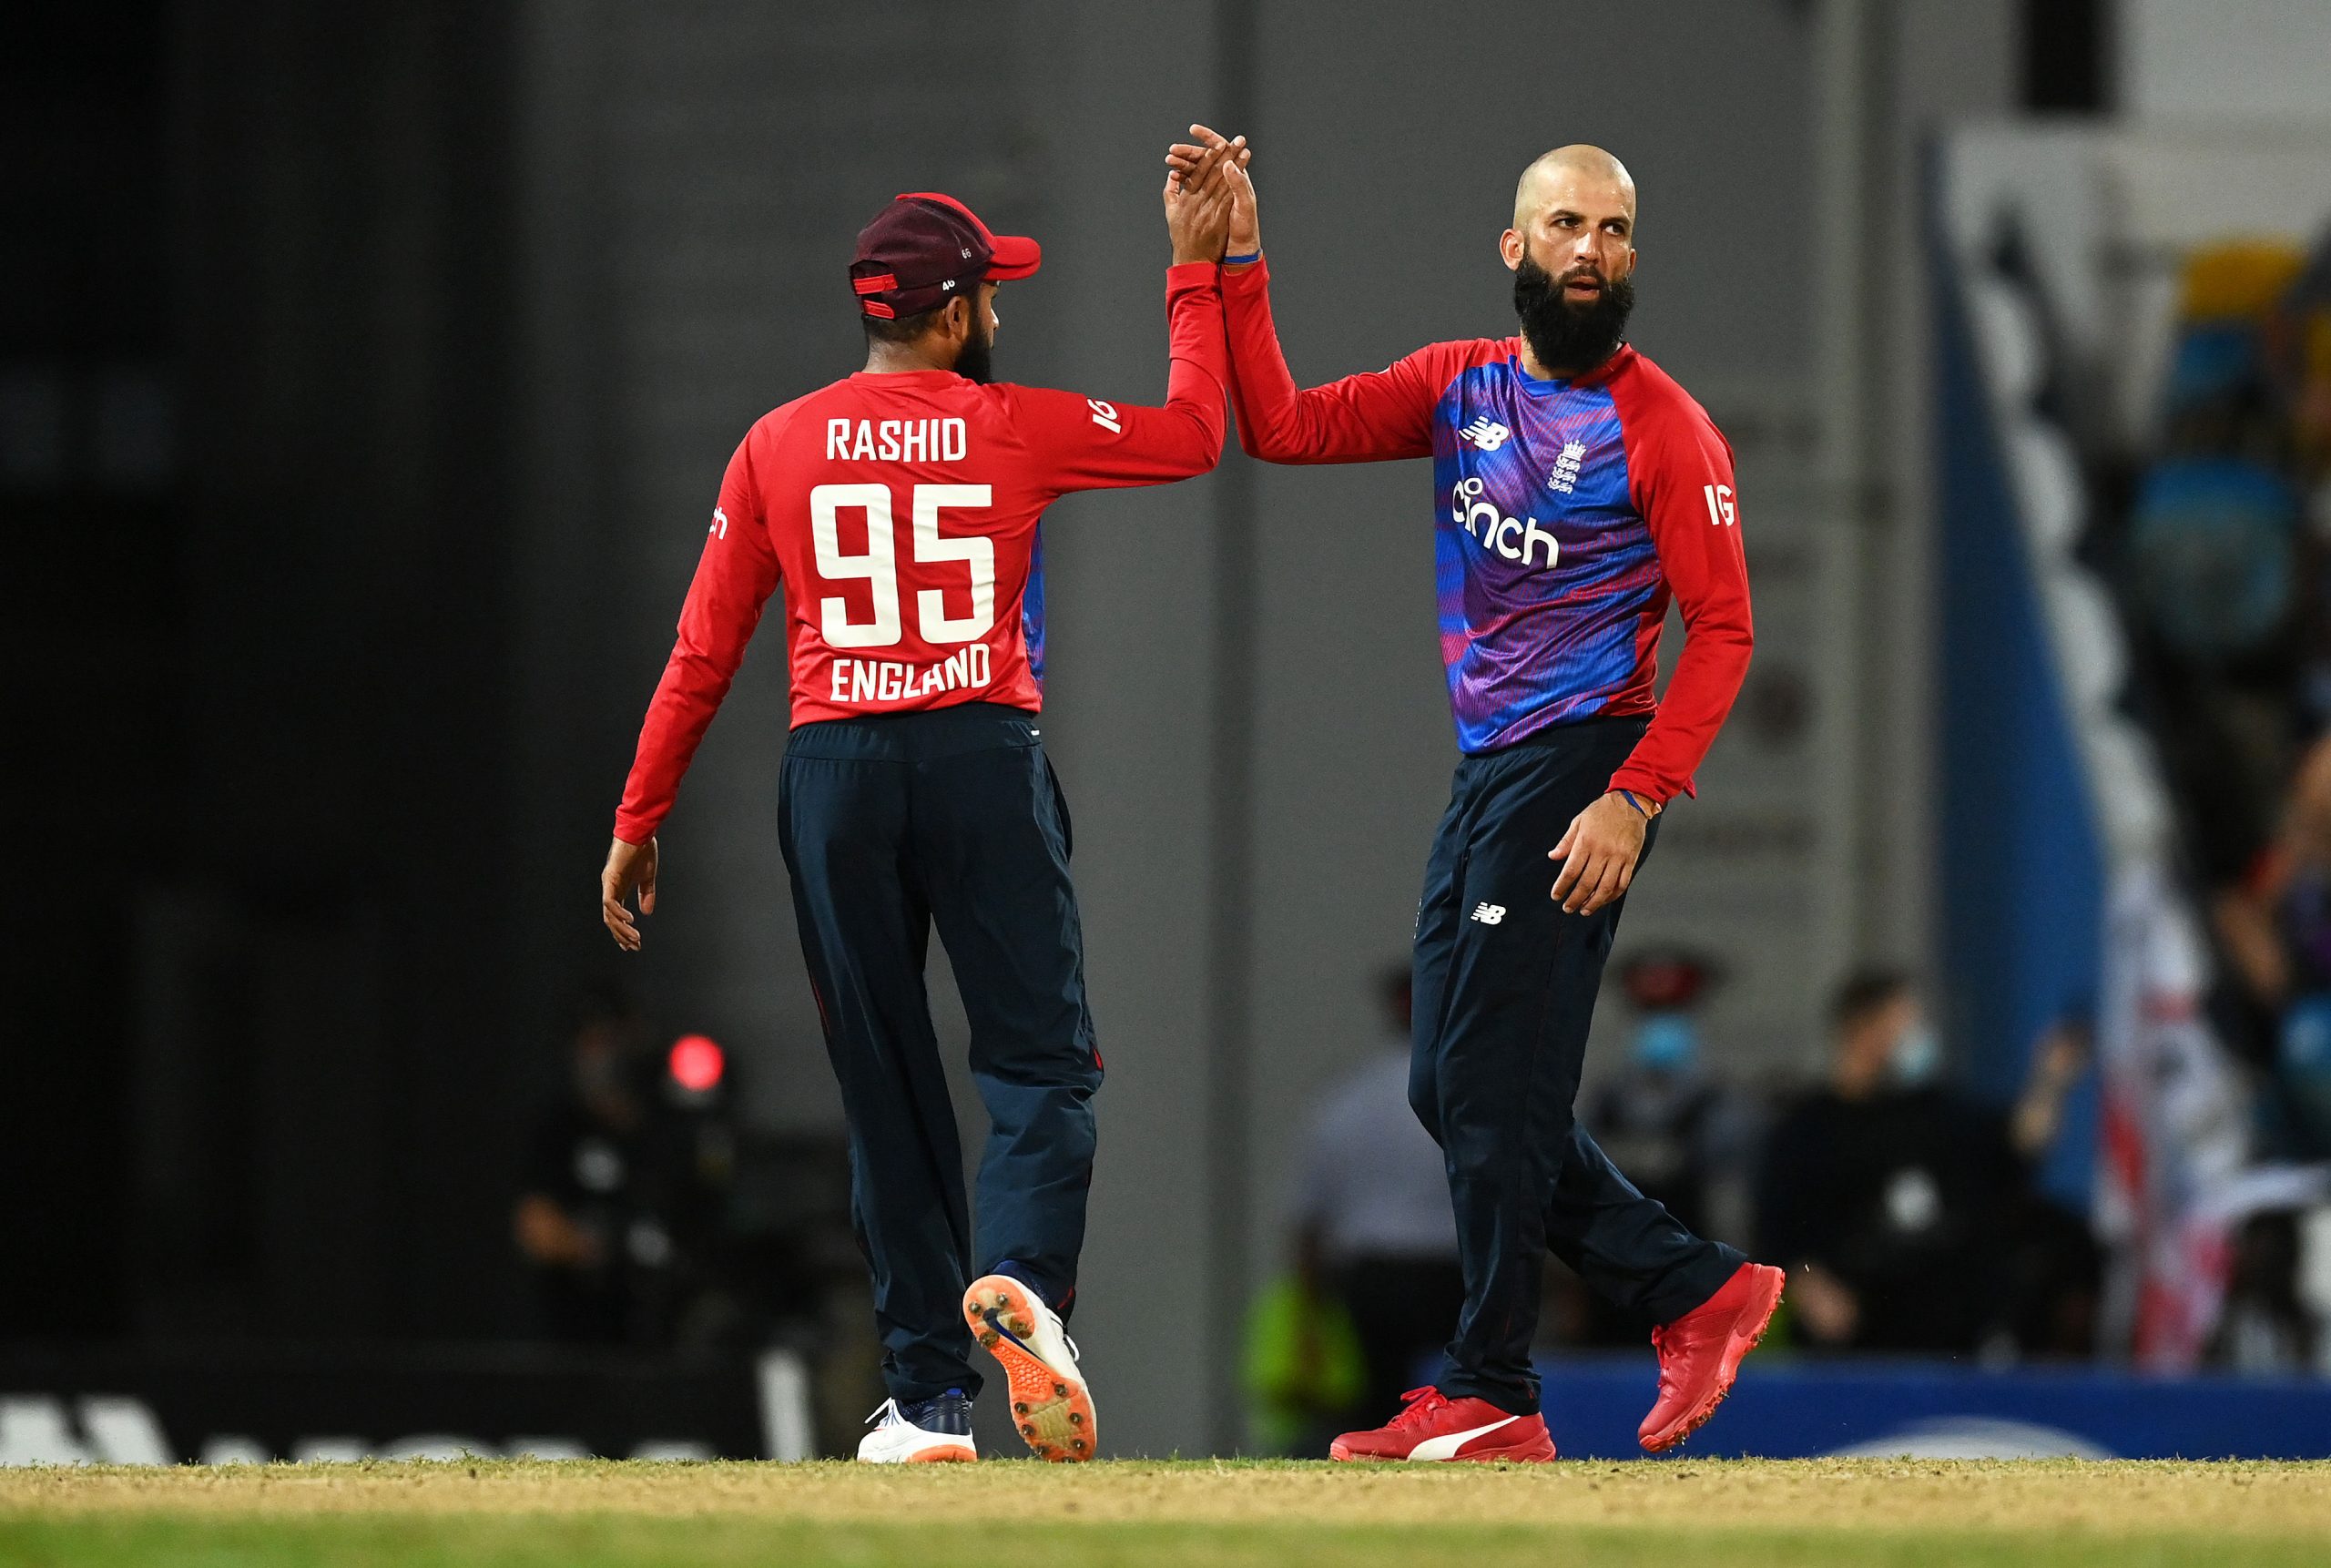 Moeen Ali ruled out of CSKs campaign opener against KKR. Find why?